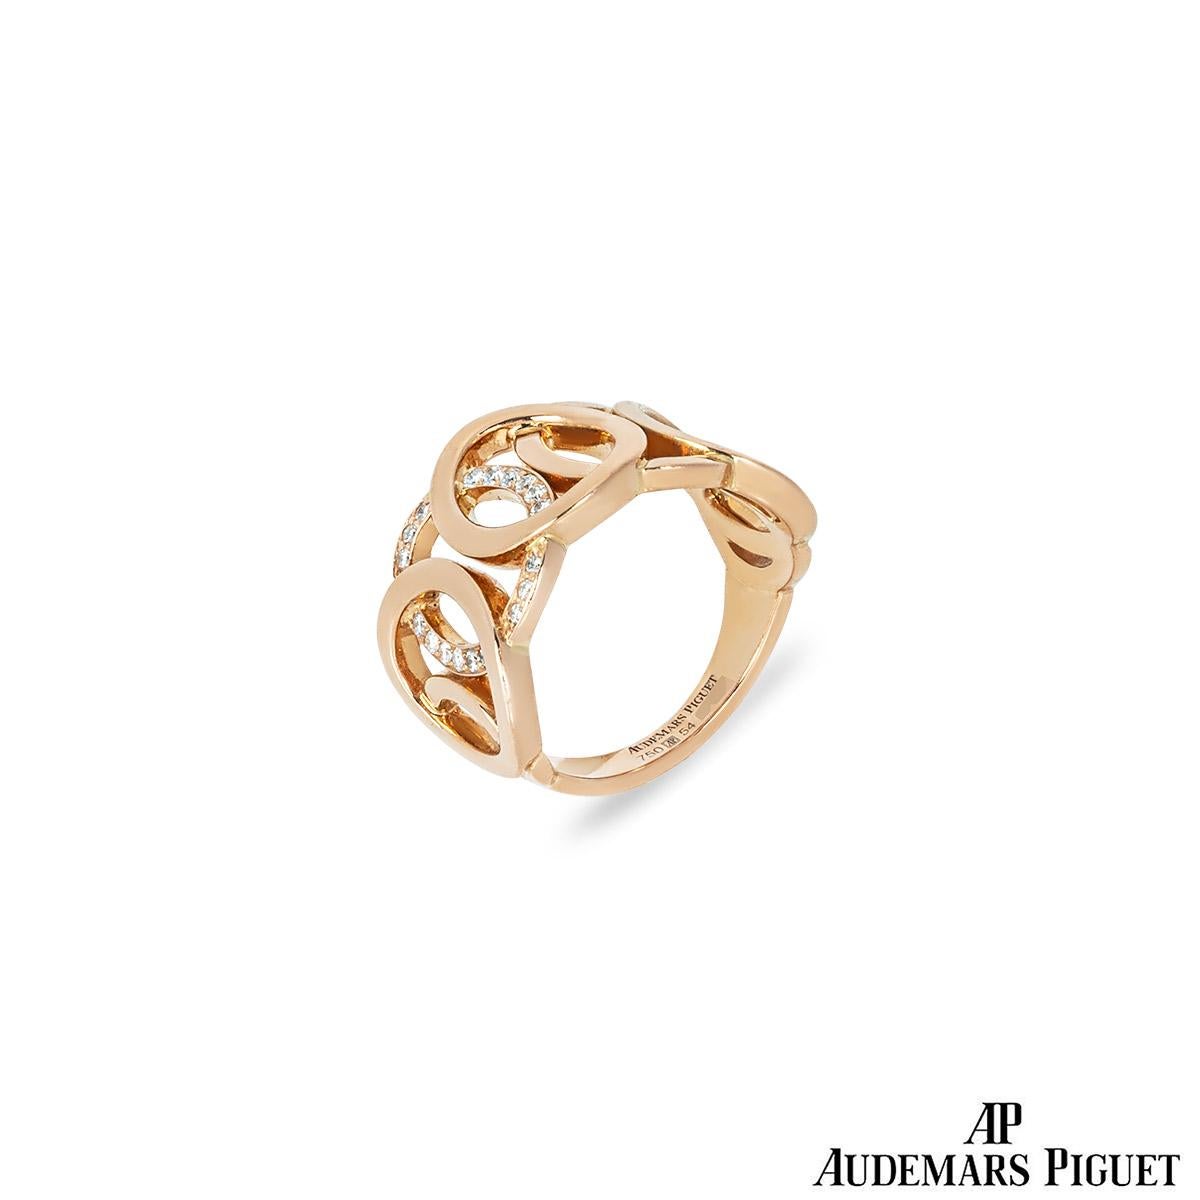 A charming 18k rose gold diamond set ring by Audemars Piguet, from their Millenary collection. The dress ring features 5 large interlocking circles and 2 small ones. One of the circles is pave set with 18 round brilliant cut diamonds which have an